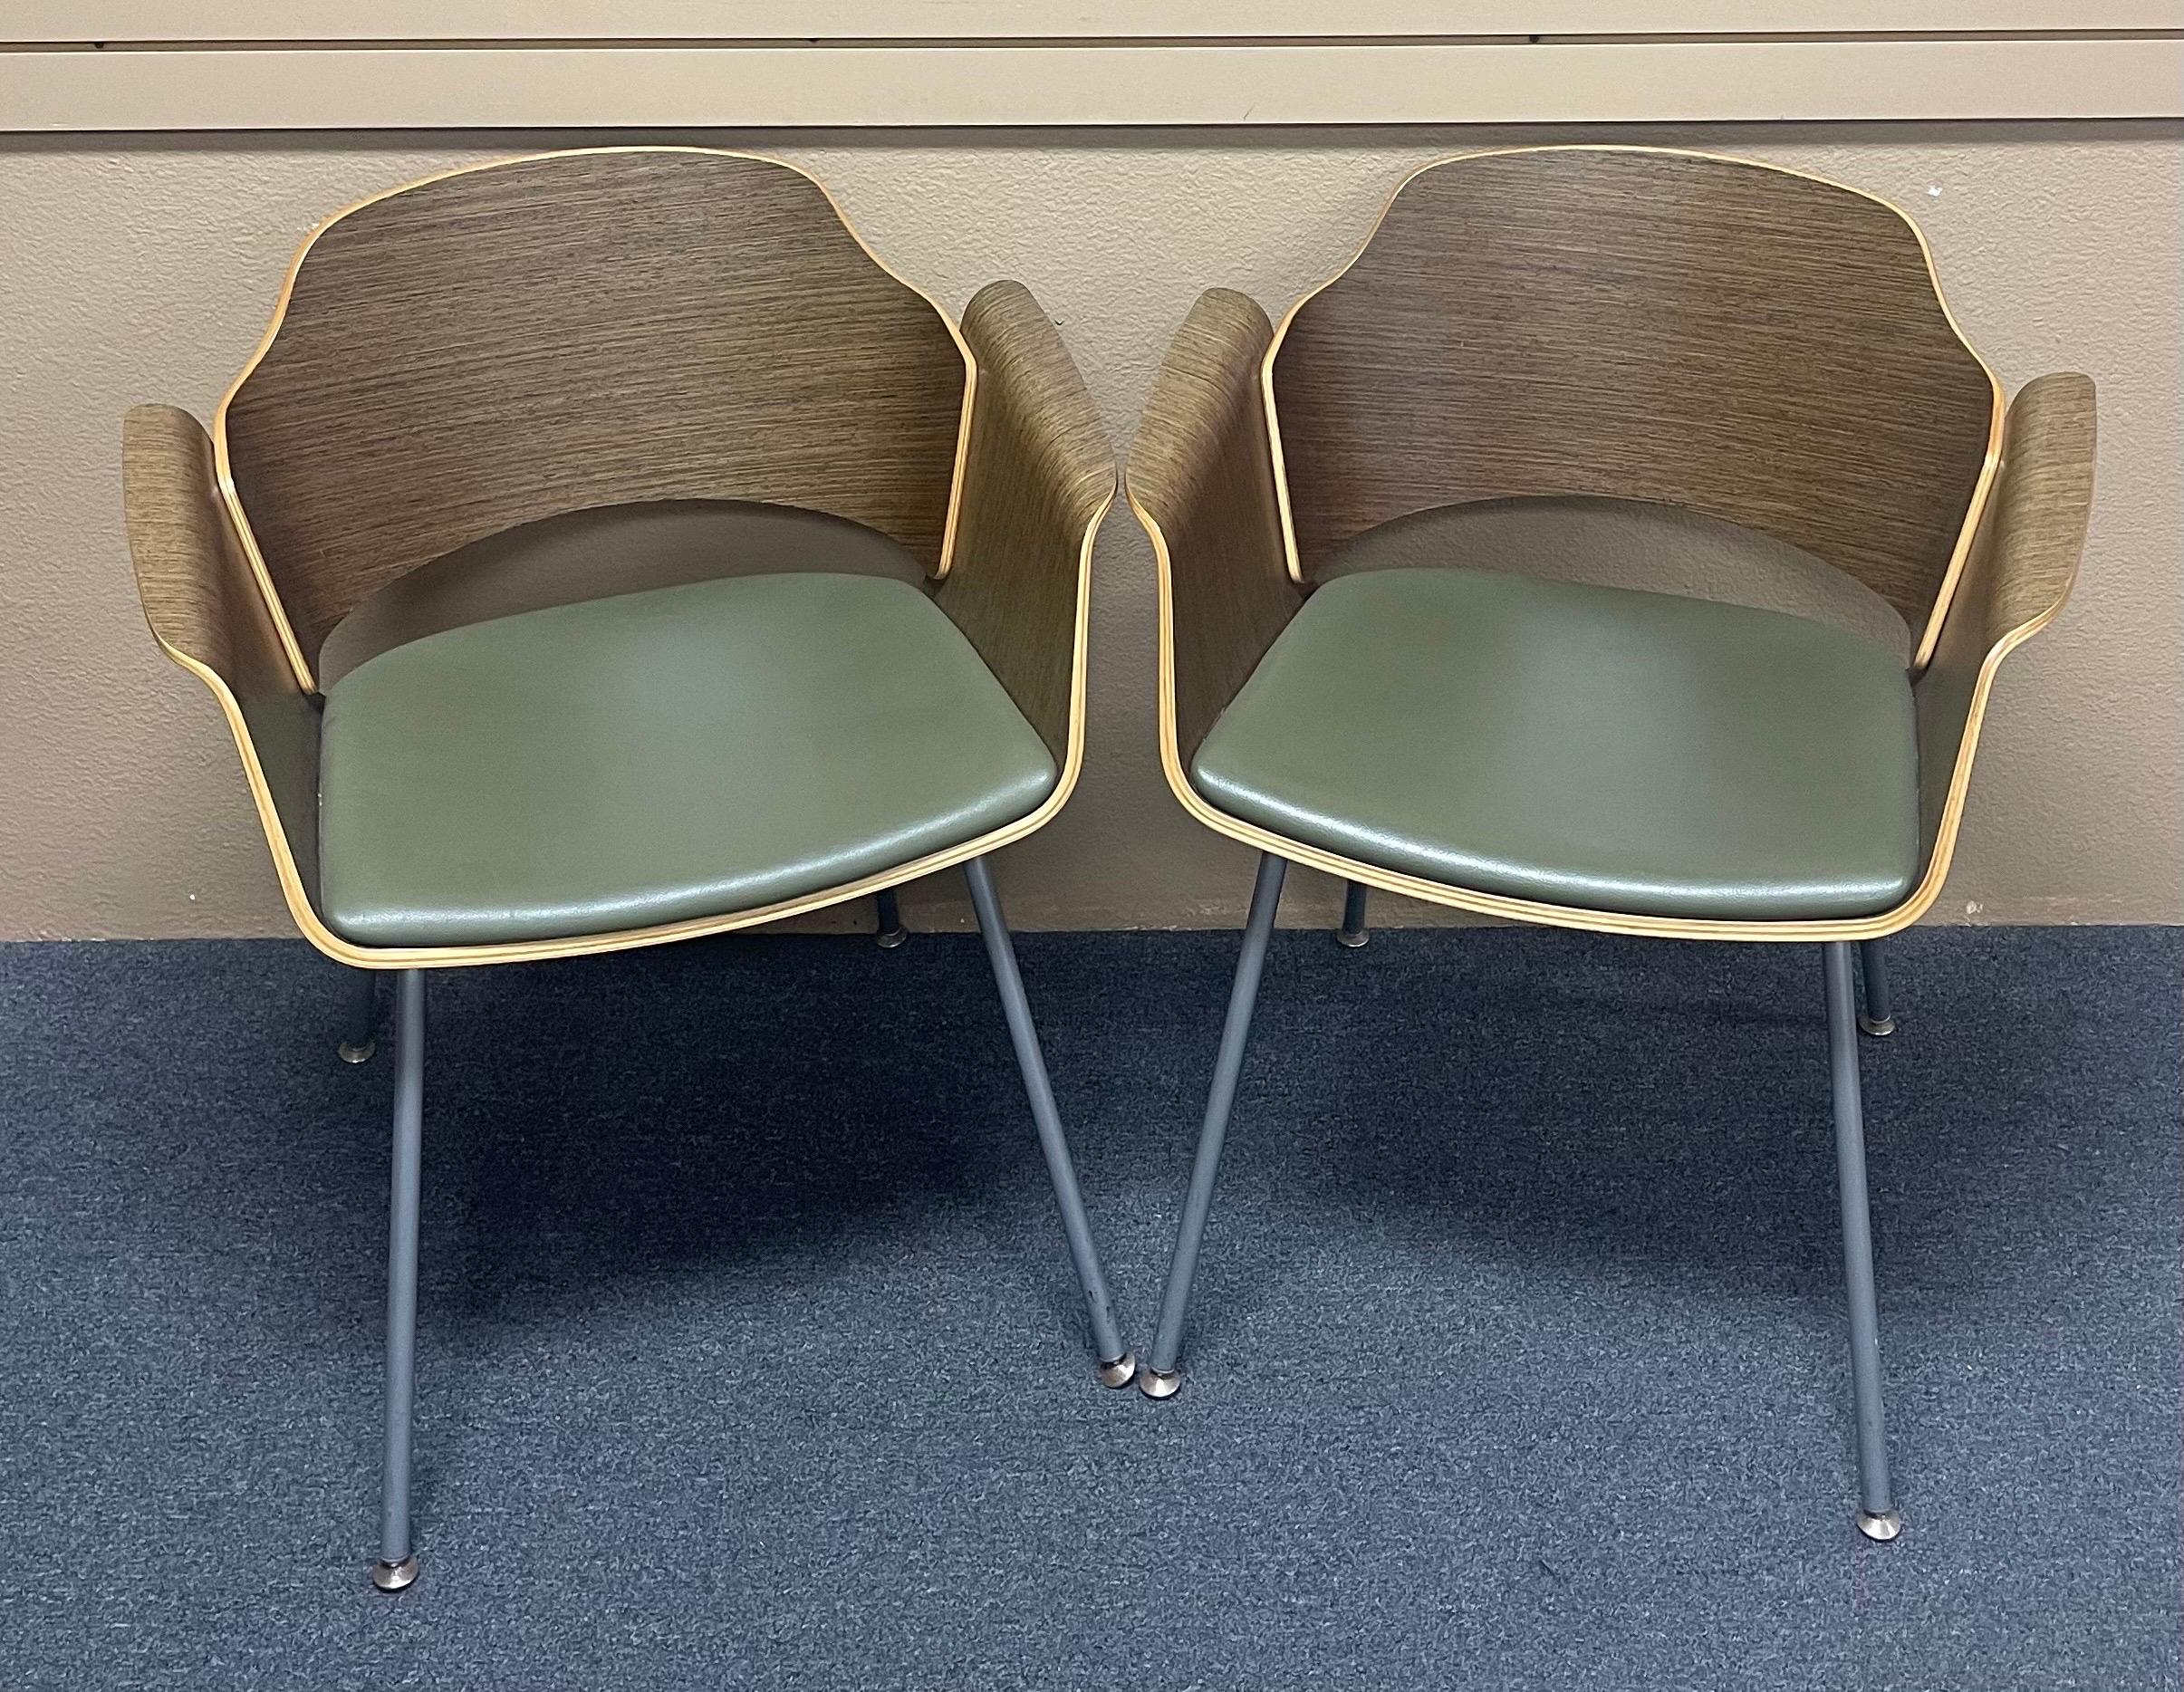 Pair of vintage bent wood lounge chairs with walnut veneer frame, avocado vinyl upholstery and chrome legs by Stylex, circa 1980s. The pair are in very good vintage condition and measure 26.75